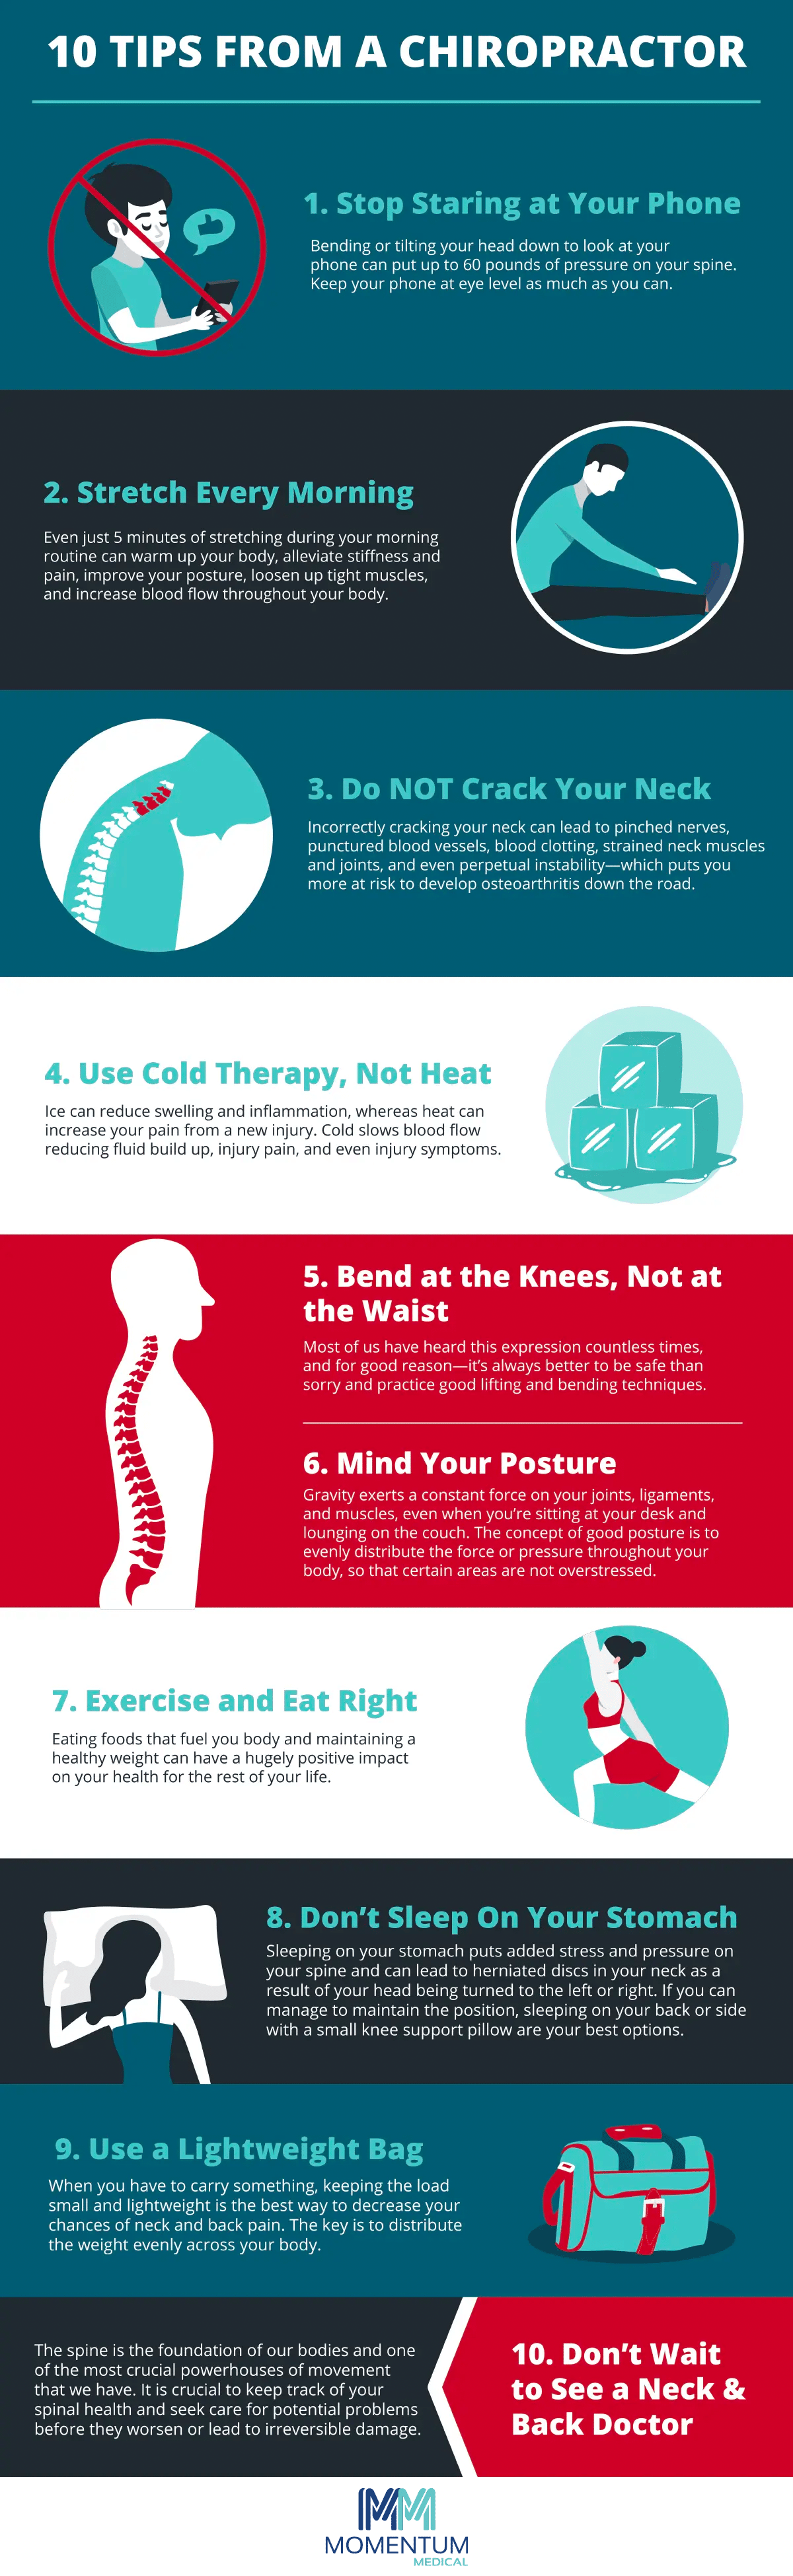 10 TIPS FROM A CHIROPRACTOR